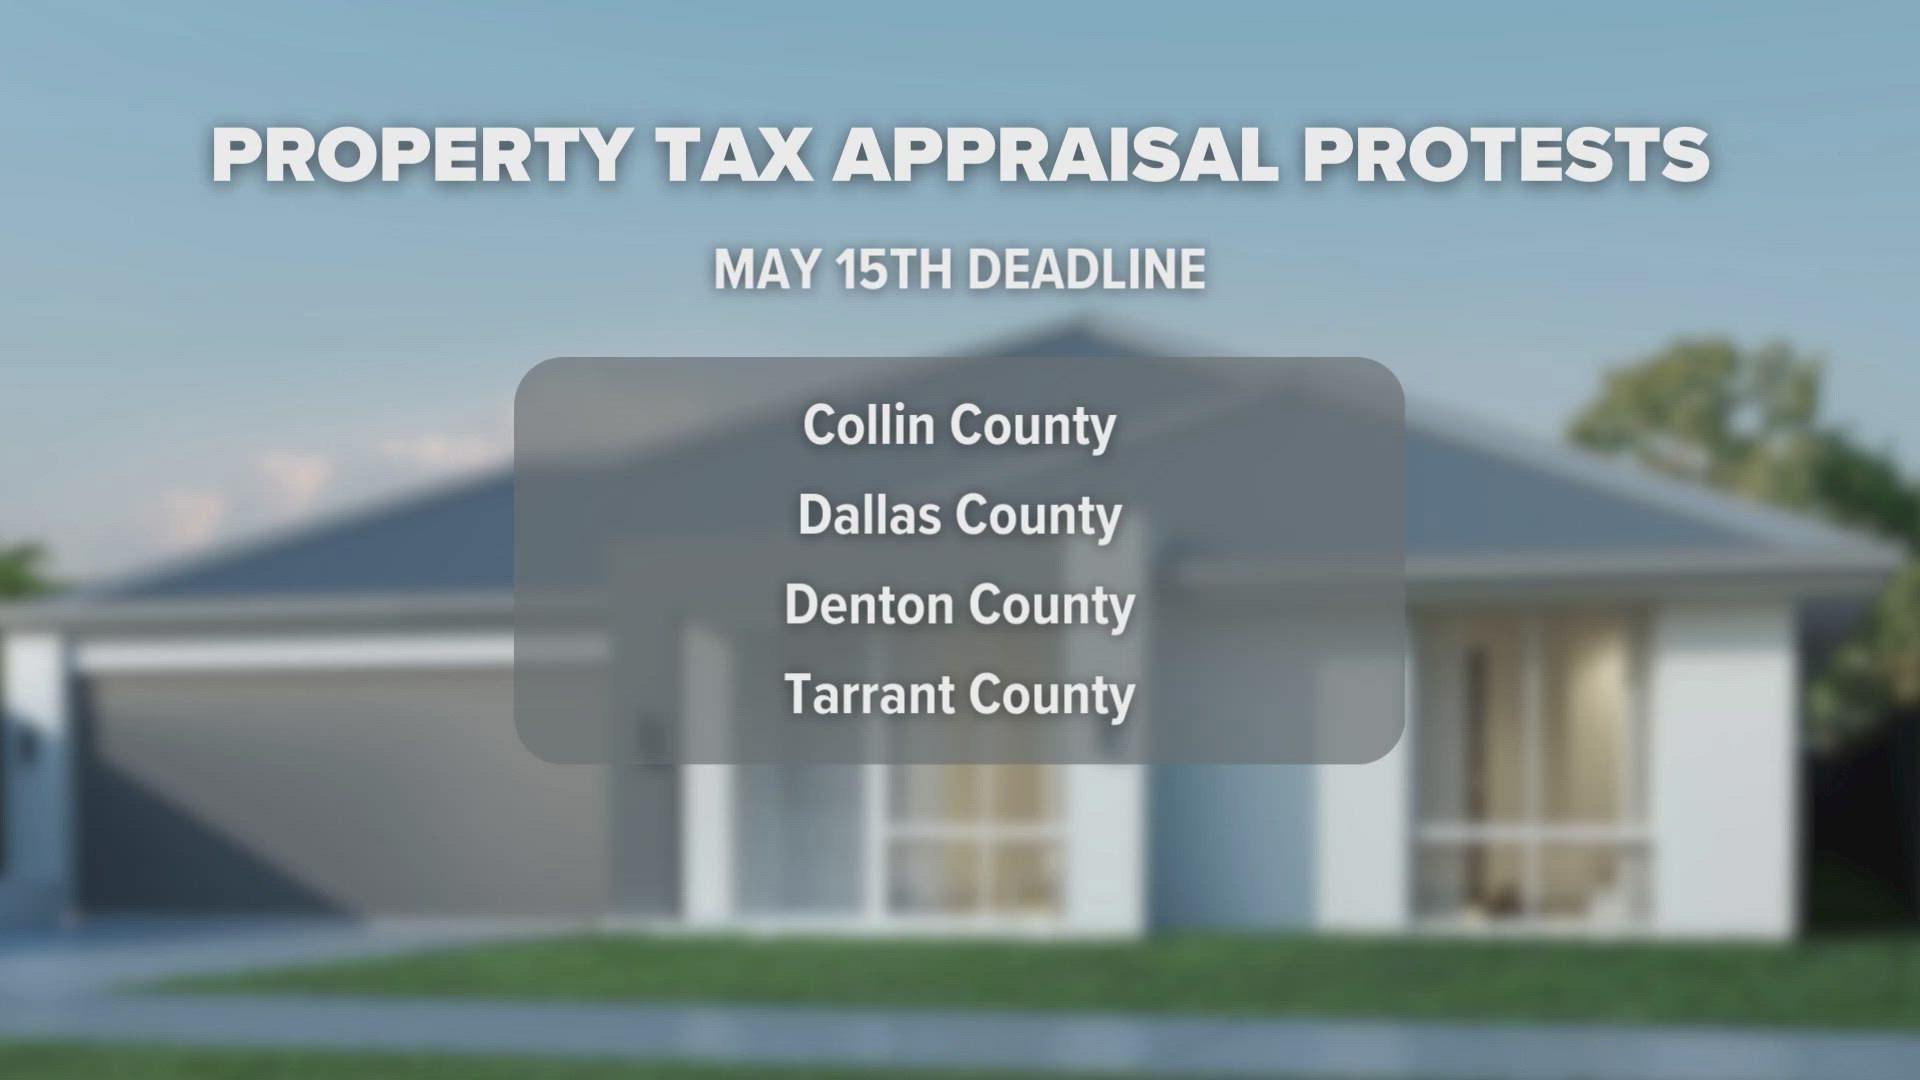 Four major counties deadline to protest appraisals is May 14.